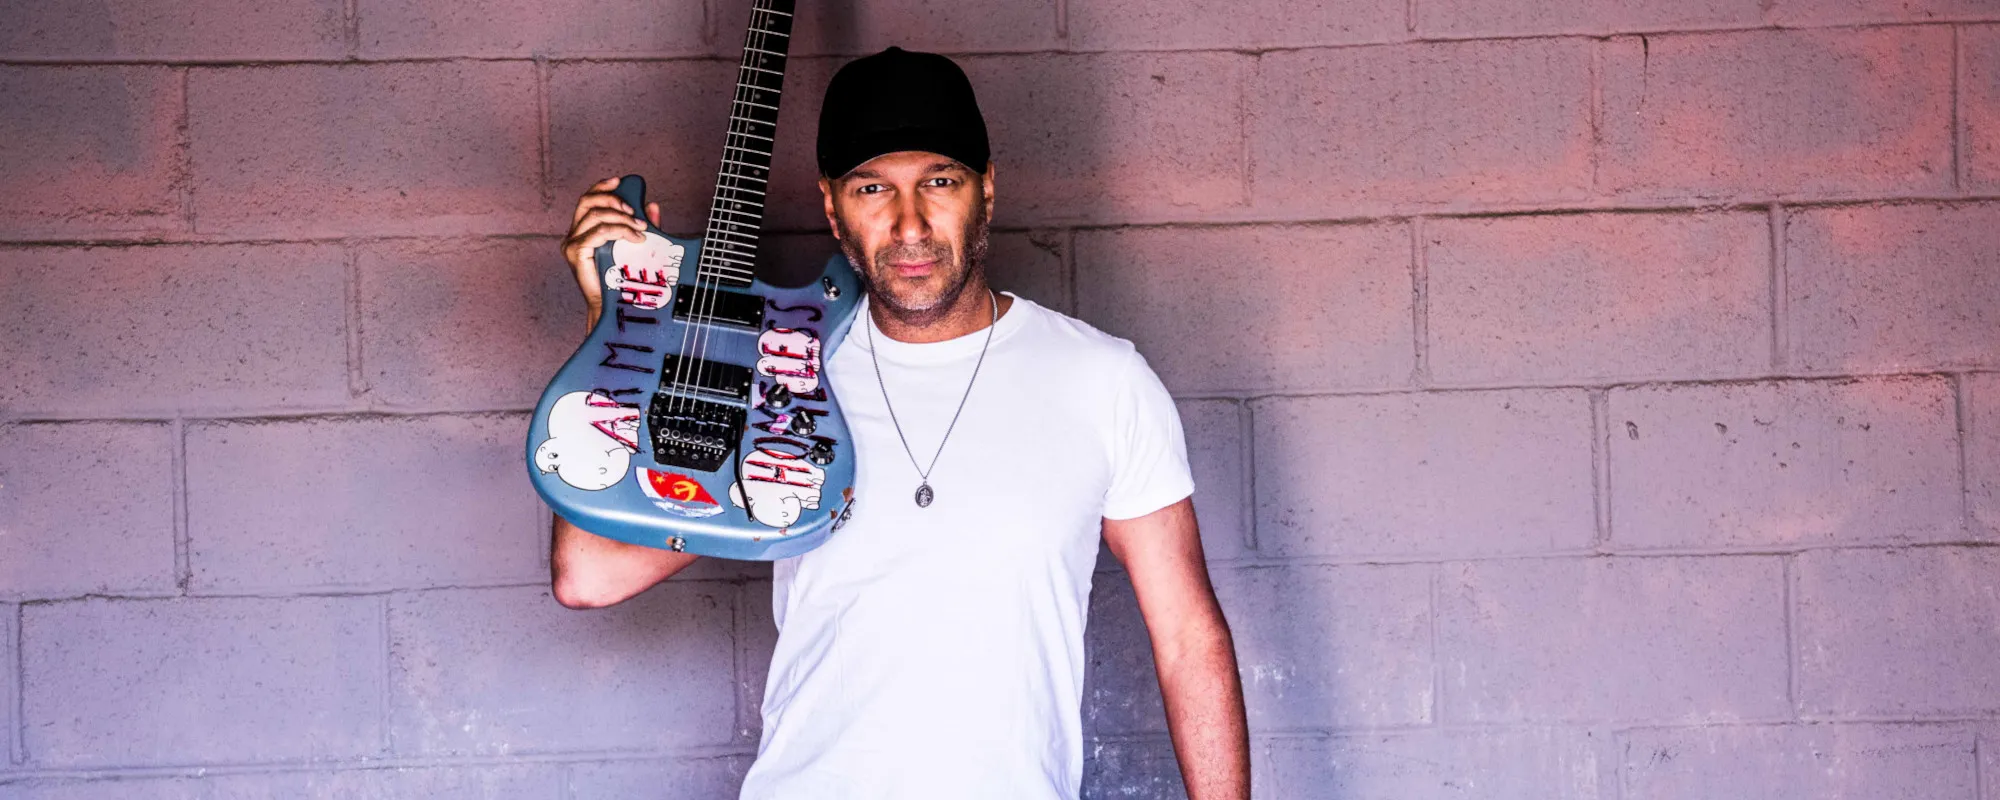 Rage Against the Machine’s Tom Morello Knocked Down After Fan Rushes Stage